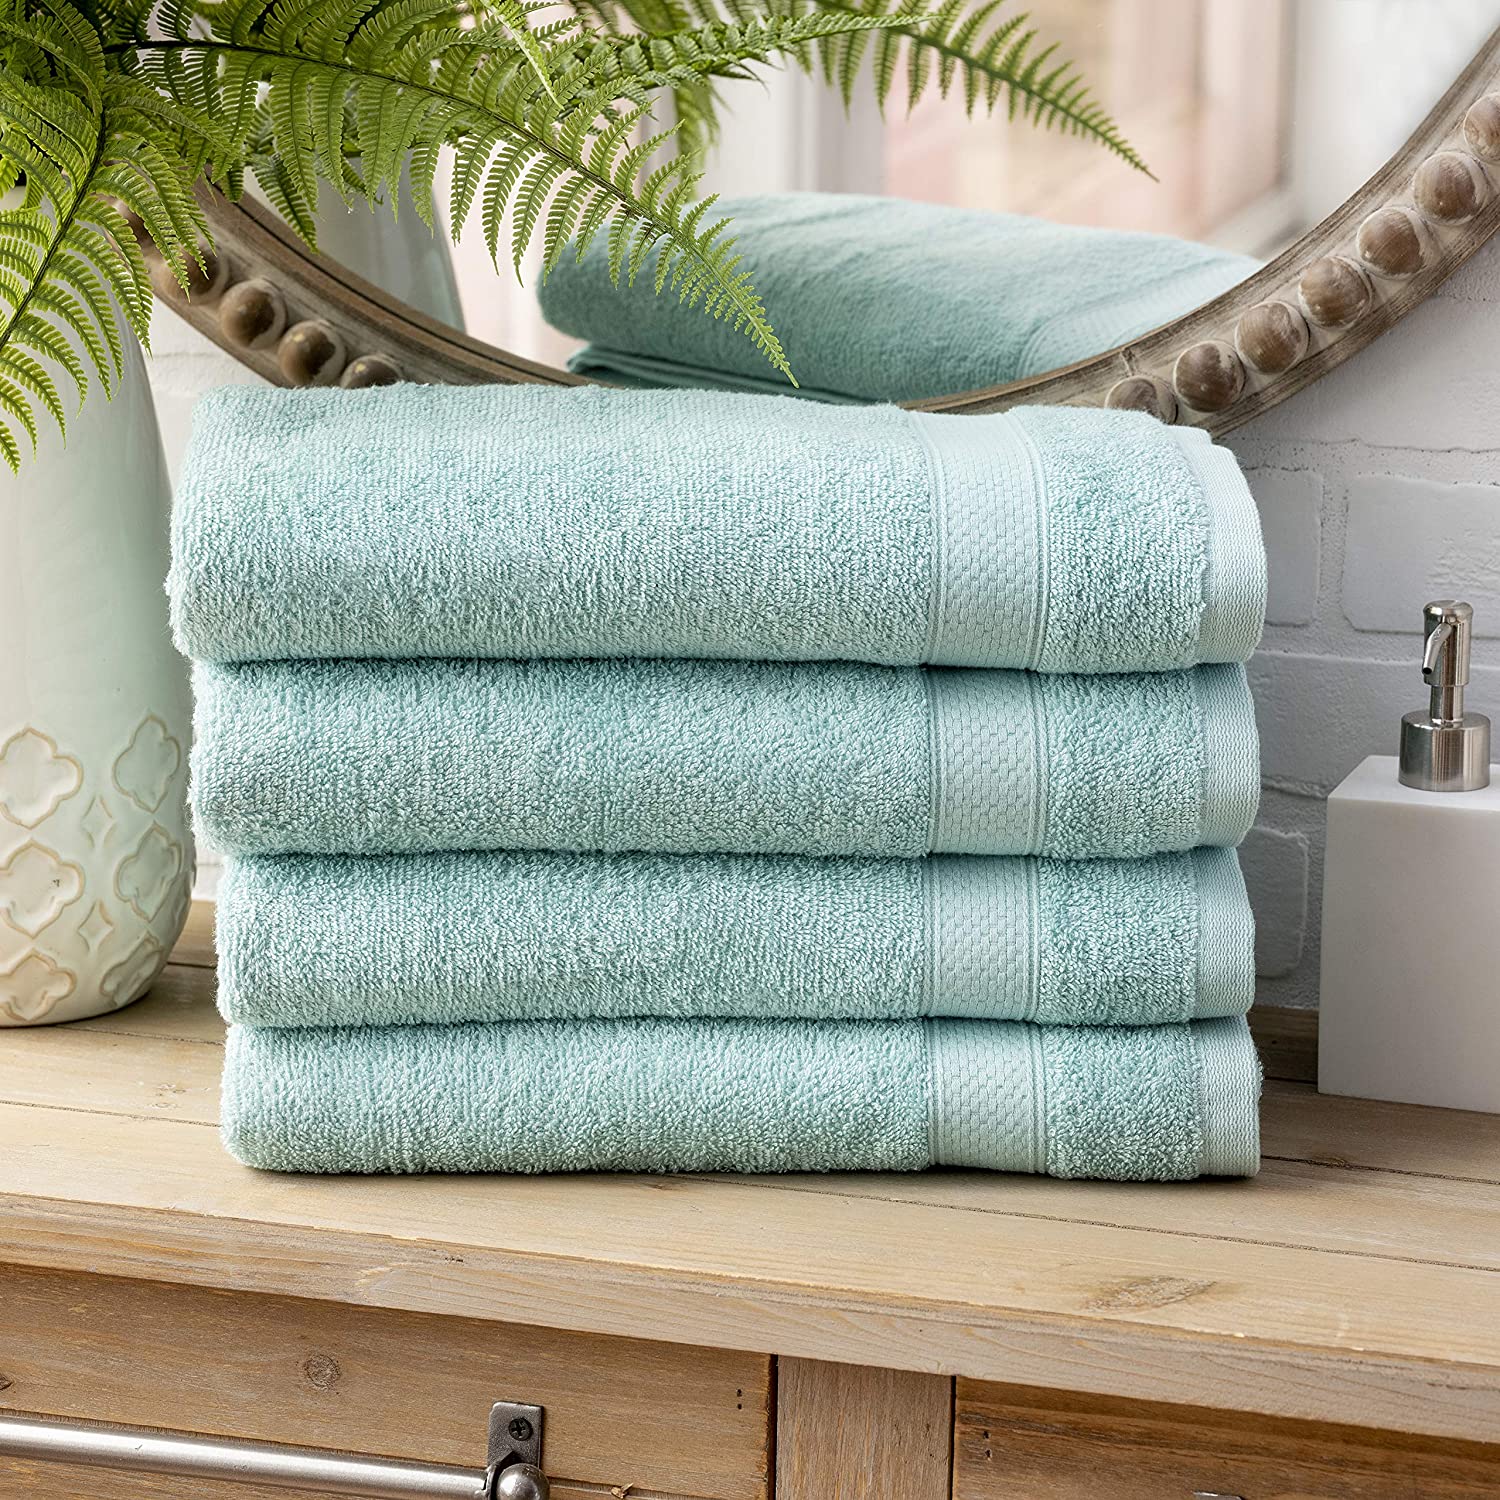 Welhome Basic 100% Cotton Towel (Duck Egg) - 8 Piece Set - Quick Dry -  Absorbent | eBay